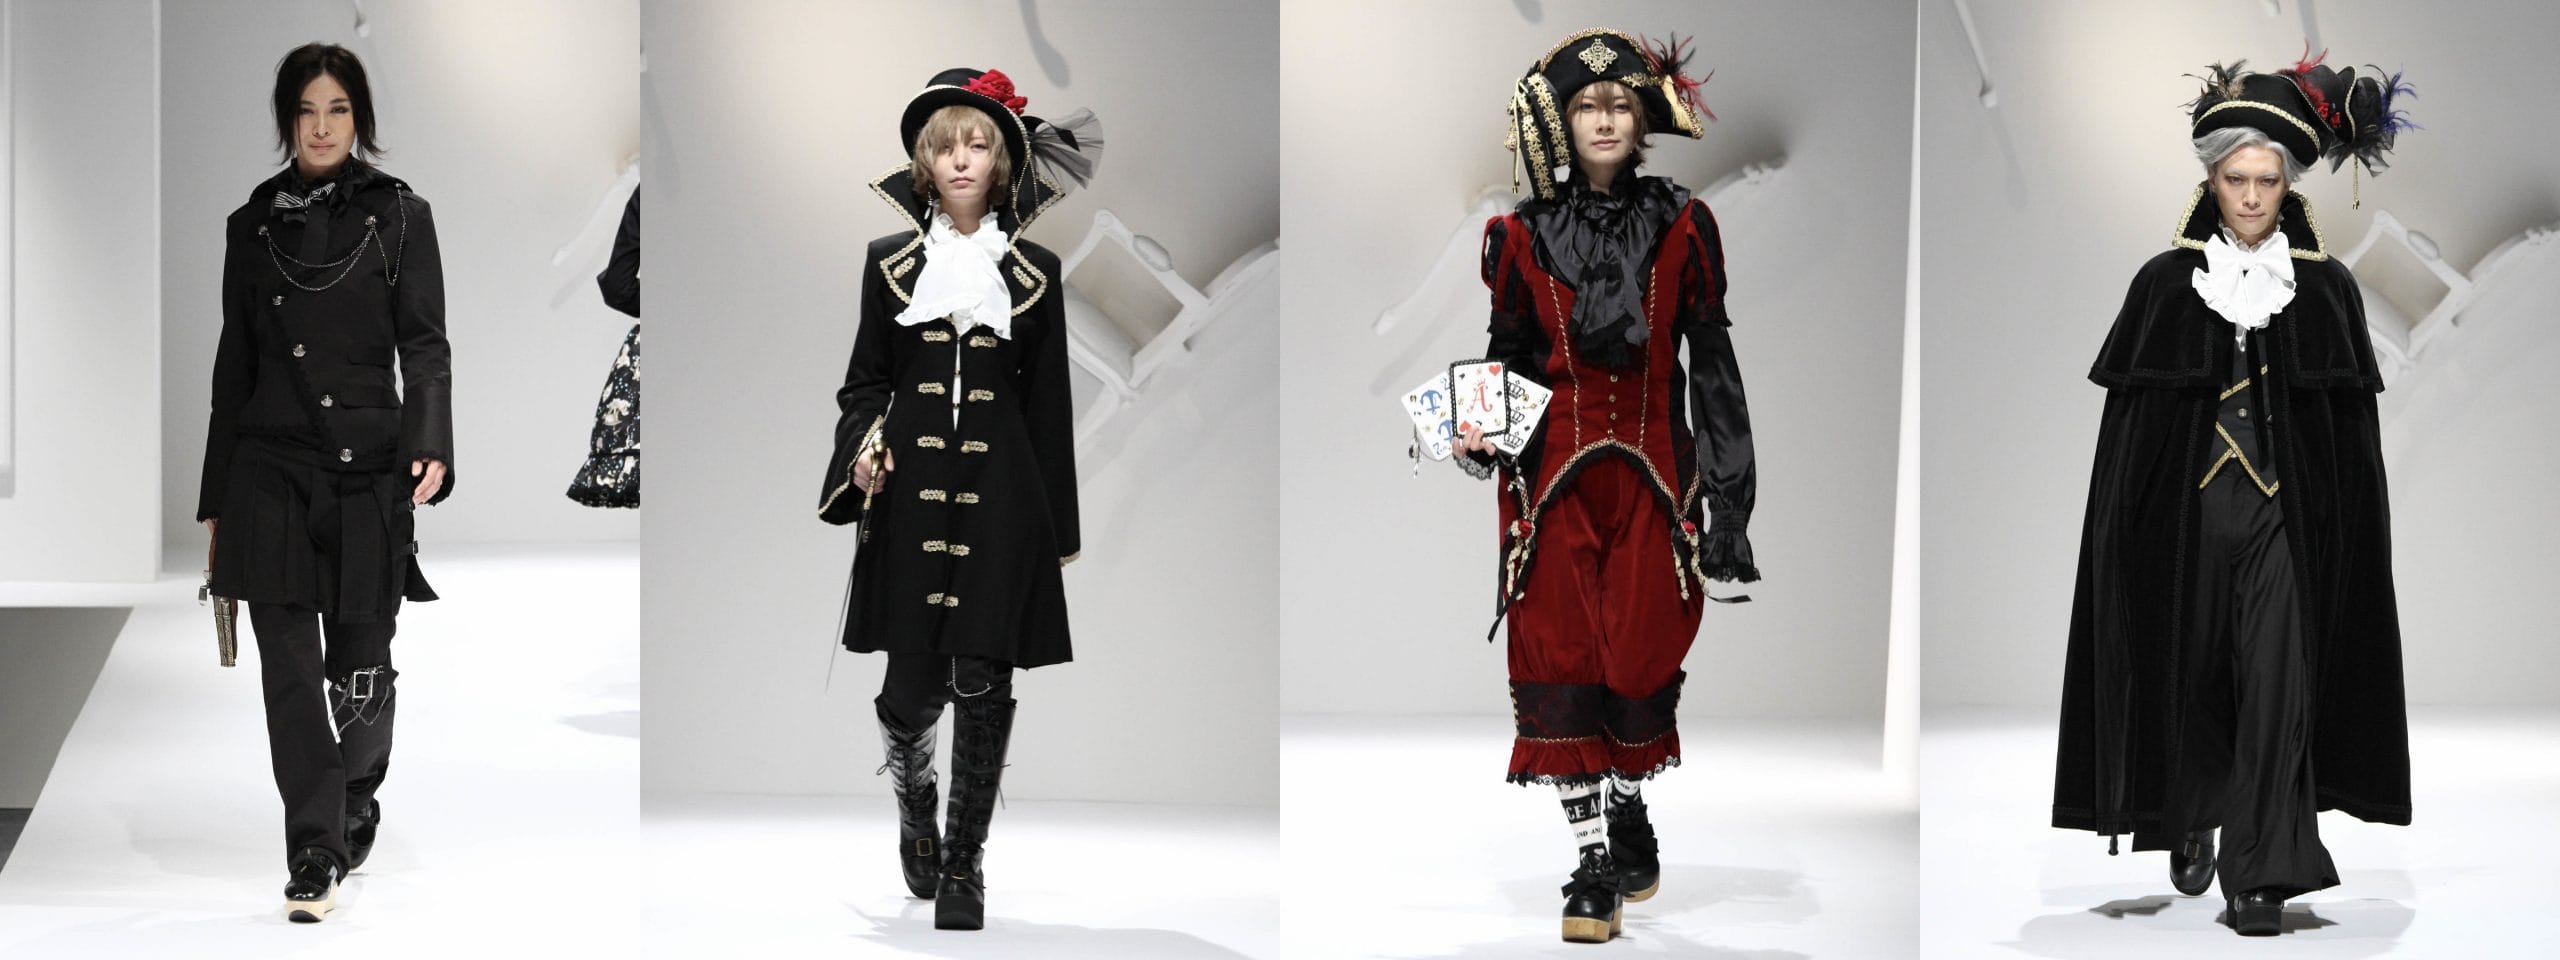 Ouji Trends: Alice and the Pirates Then and Now